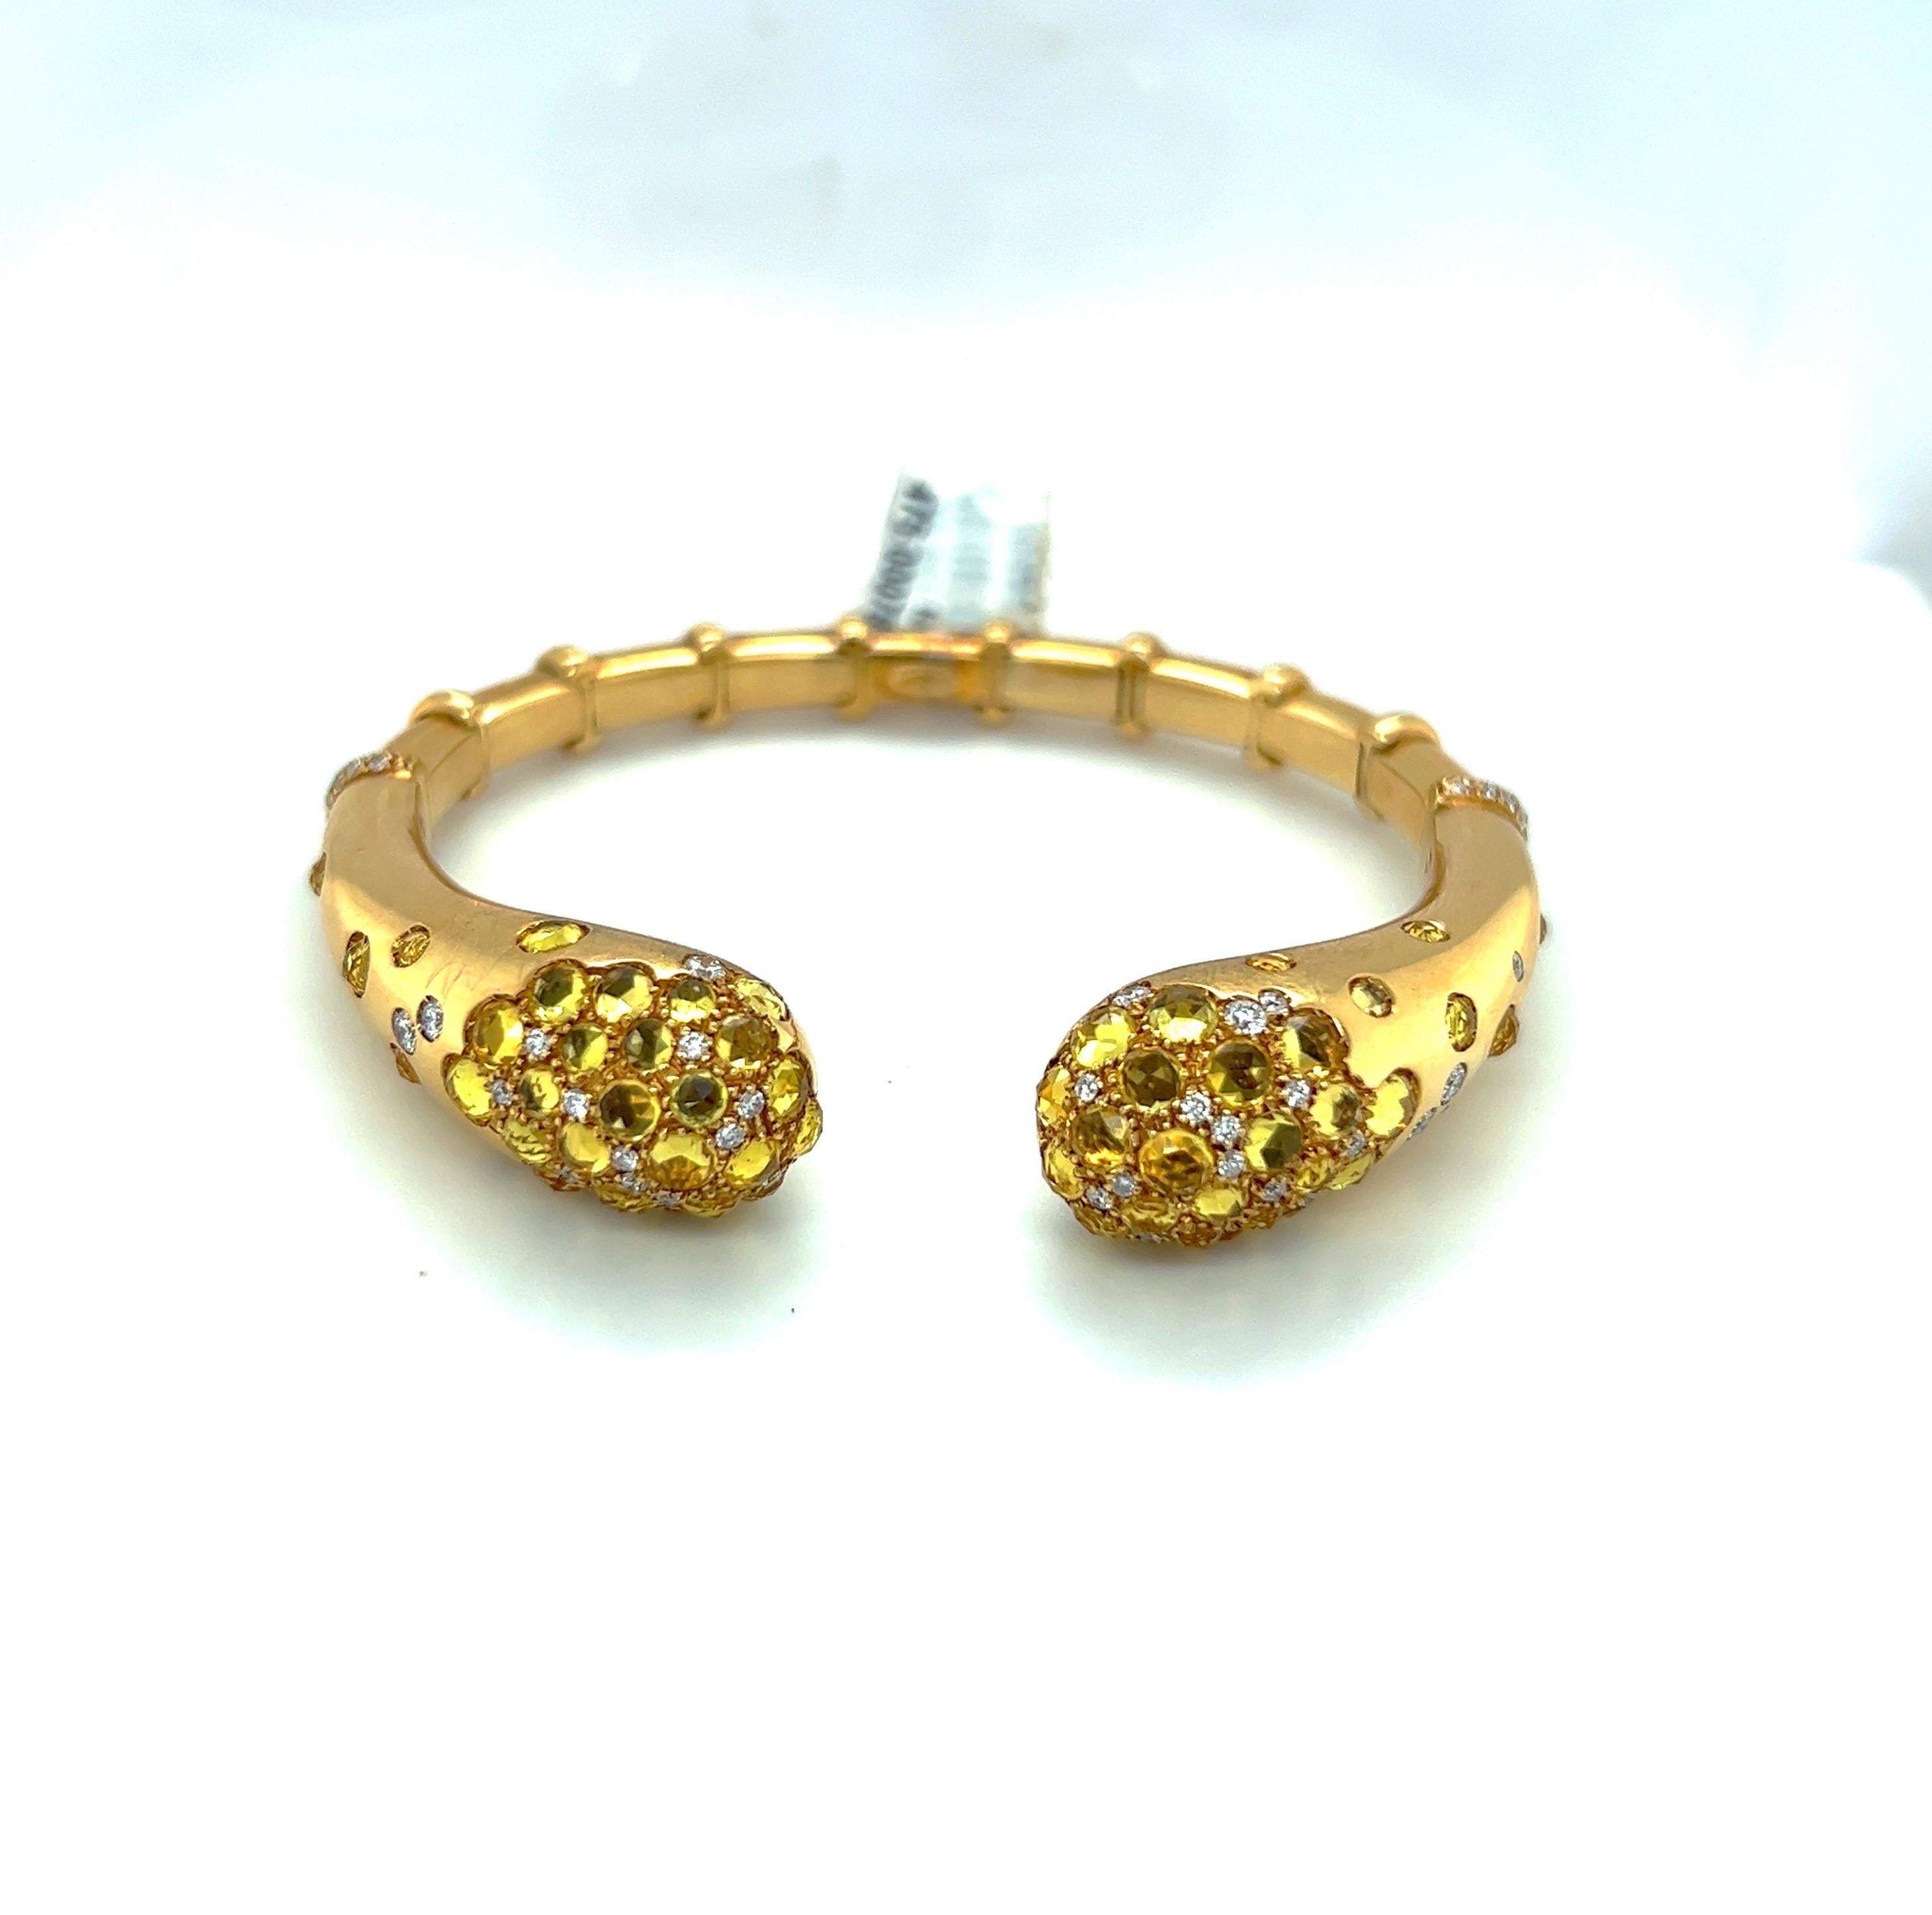 Magnificent 18 karat yellow gold bracelet designed by g. Verdi of Italy for Cellini NYC. The opened bangle bracelet is set with 8.58 carats of rose cut yellow sapphires and .89 carats of round brilliant diamonds. The inner measurement is 2.25